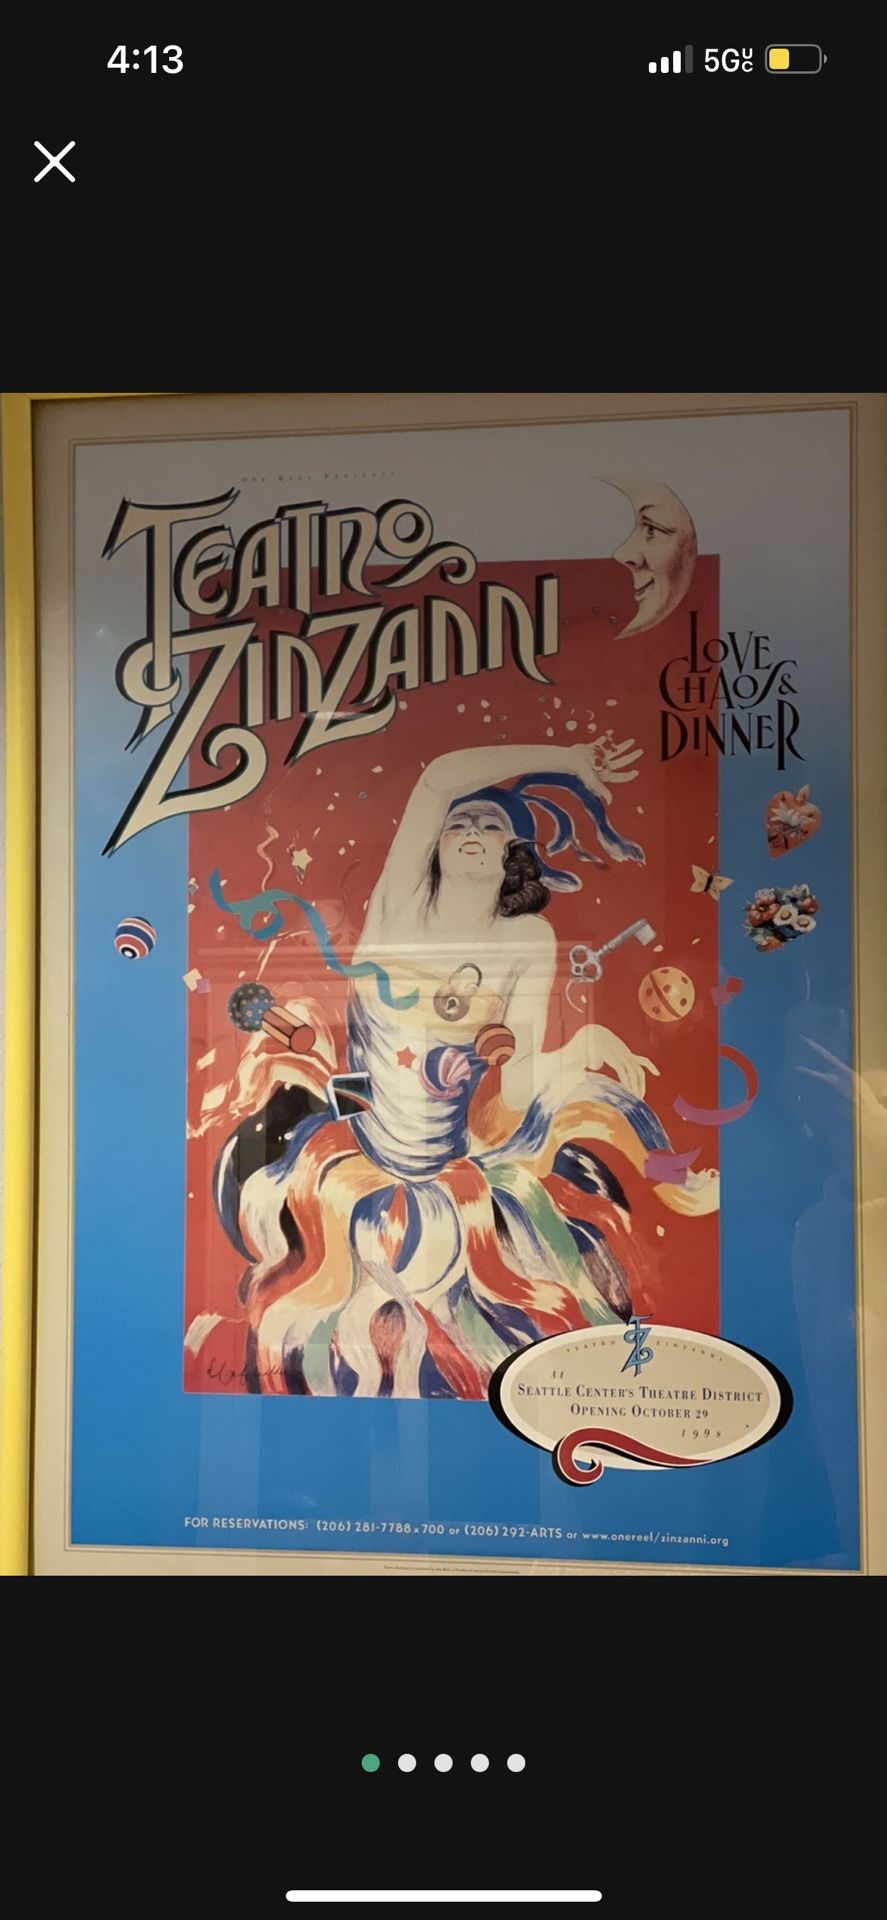 Framed 1998 Teatro Zinzanni Love Chaos & Dinner Promotional Advertisement Poster 